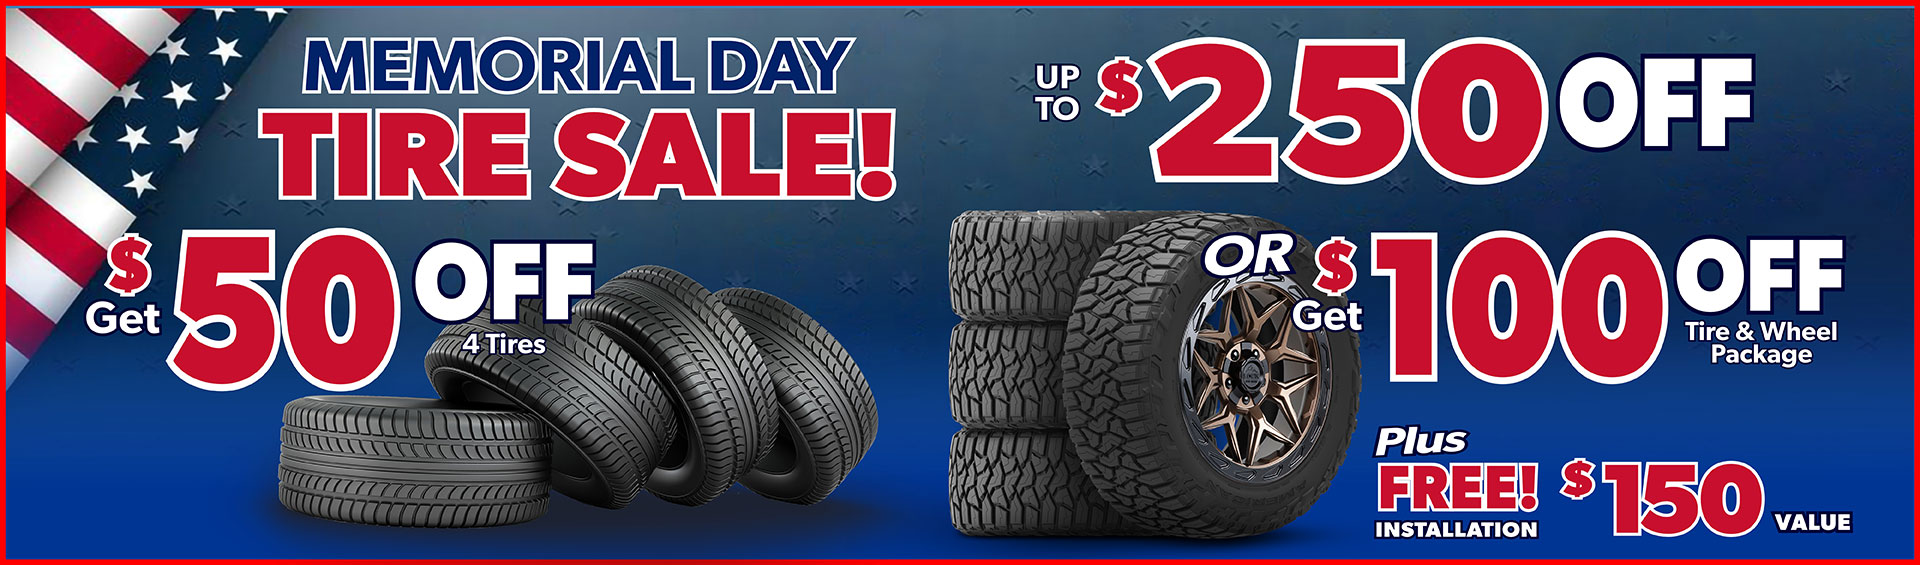 Spring into Savings at Tire Outlet US Fullerton!